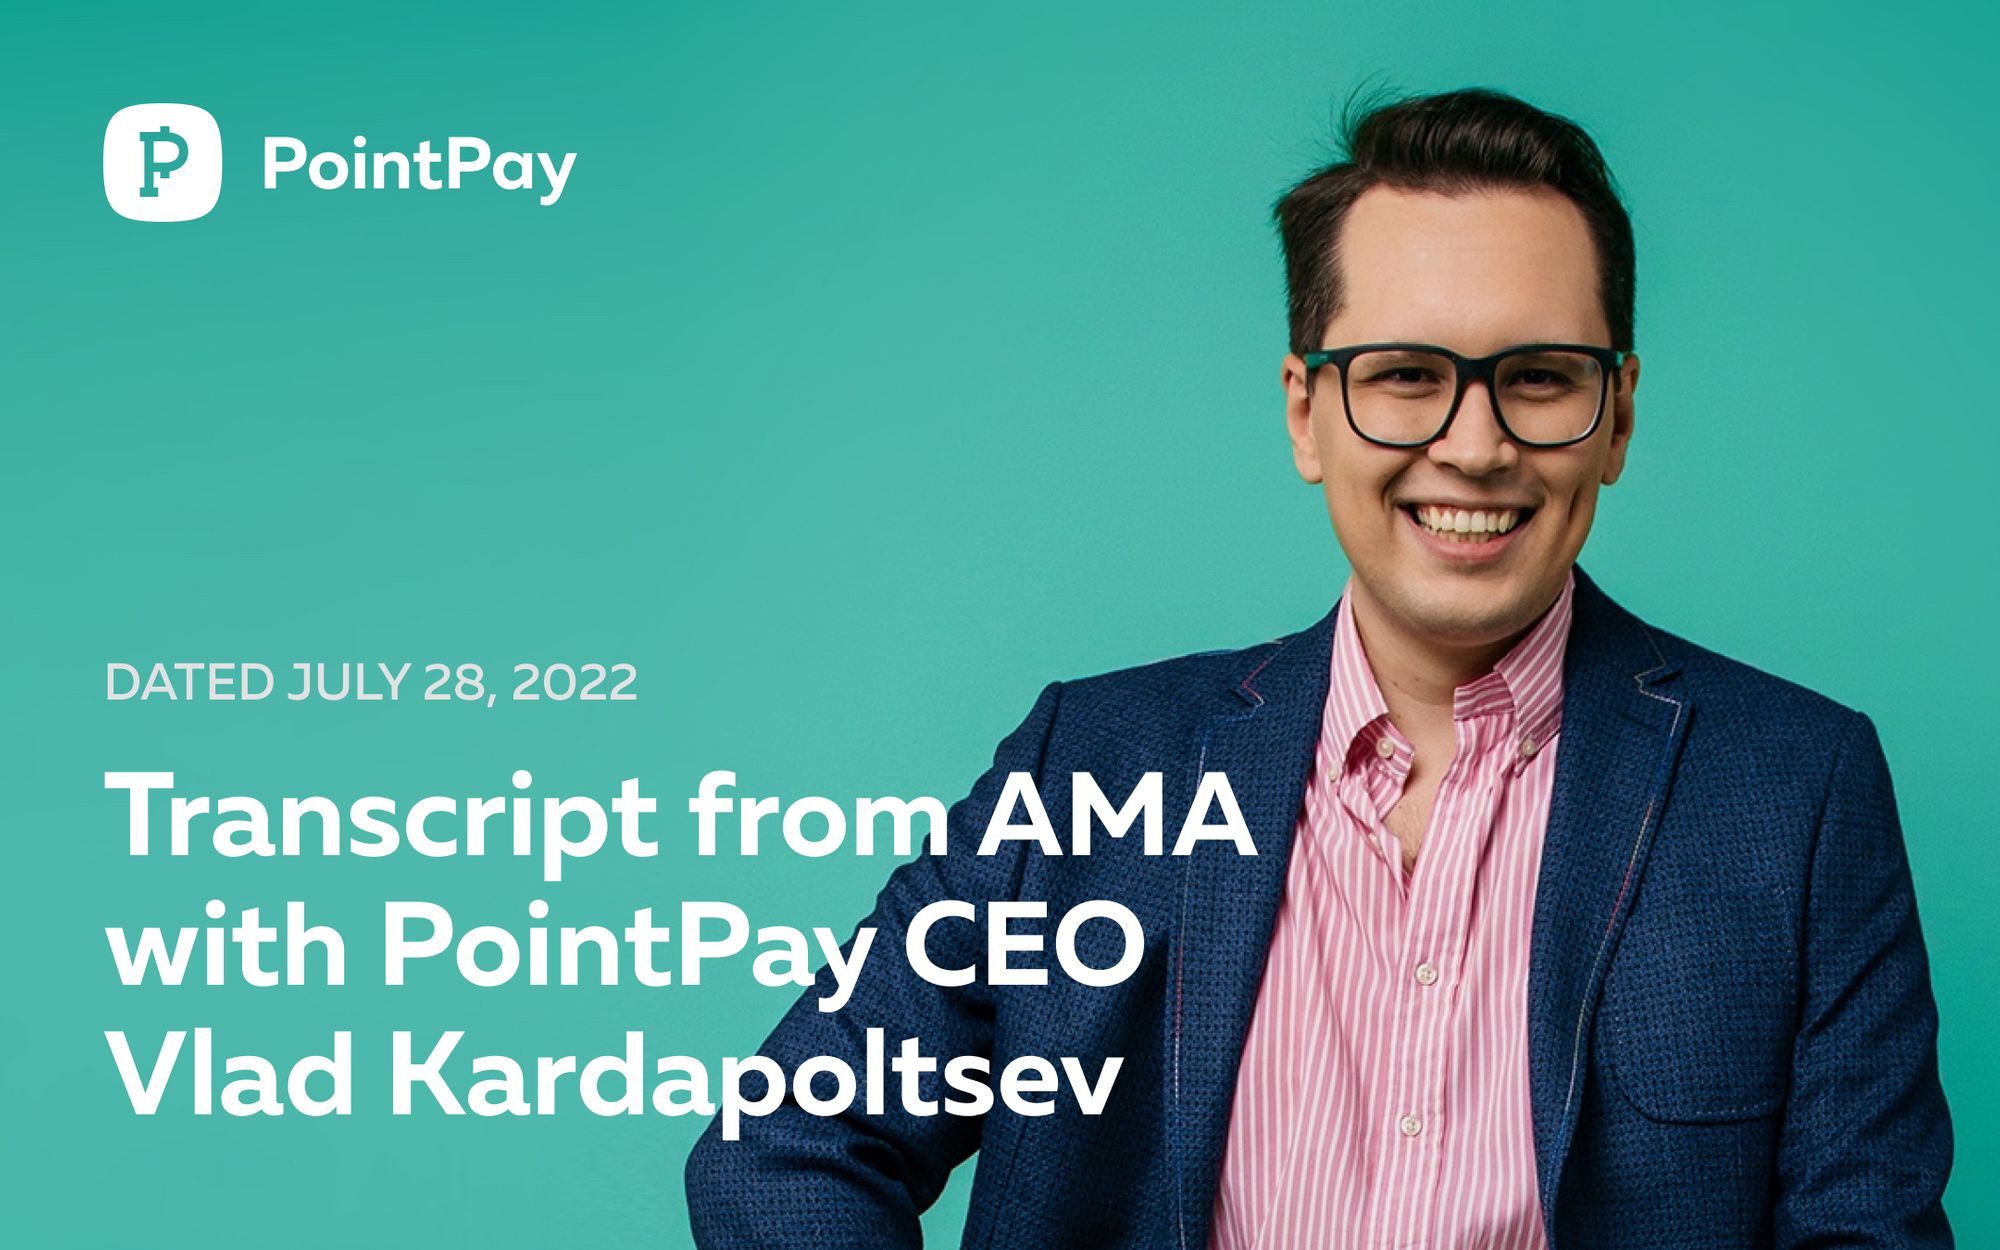 Transcript of AMA with Vladimir Kardapoltsev — CEO of PointPay